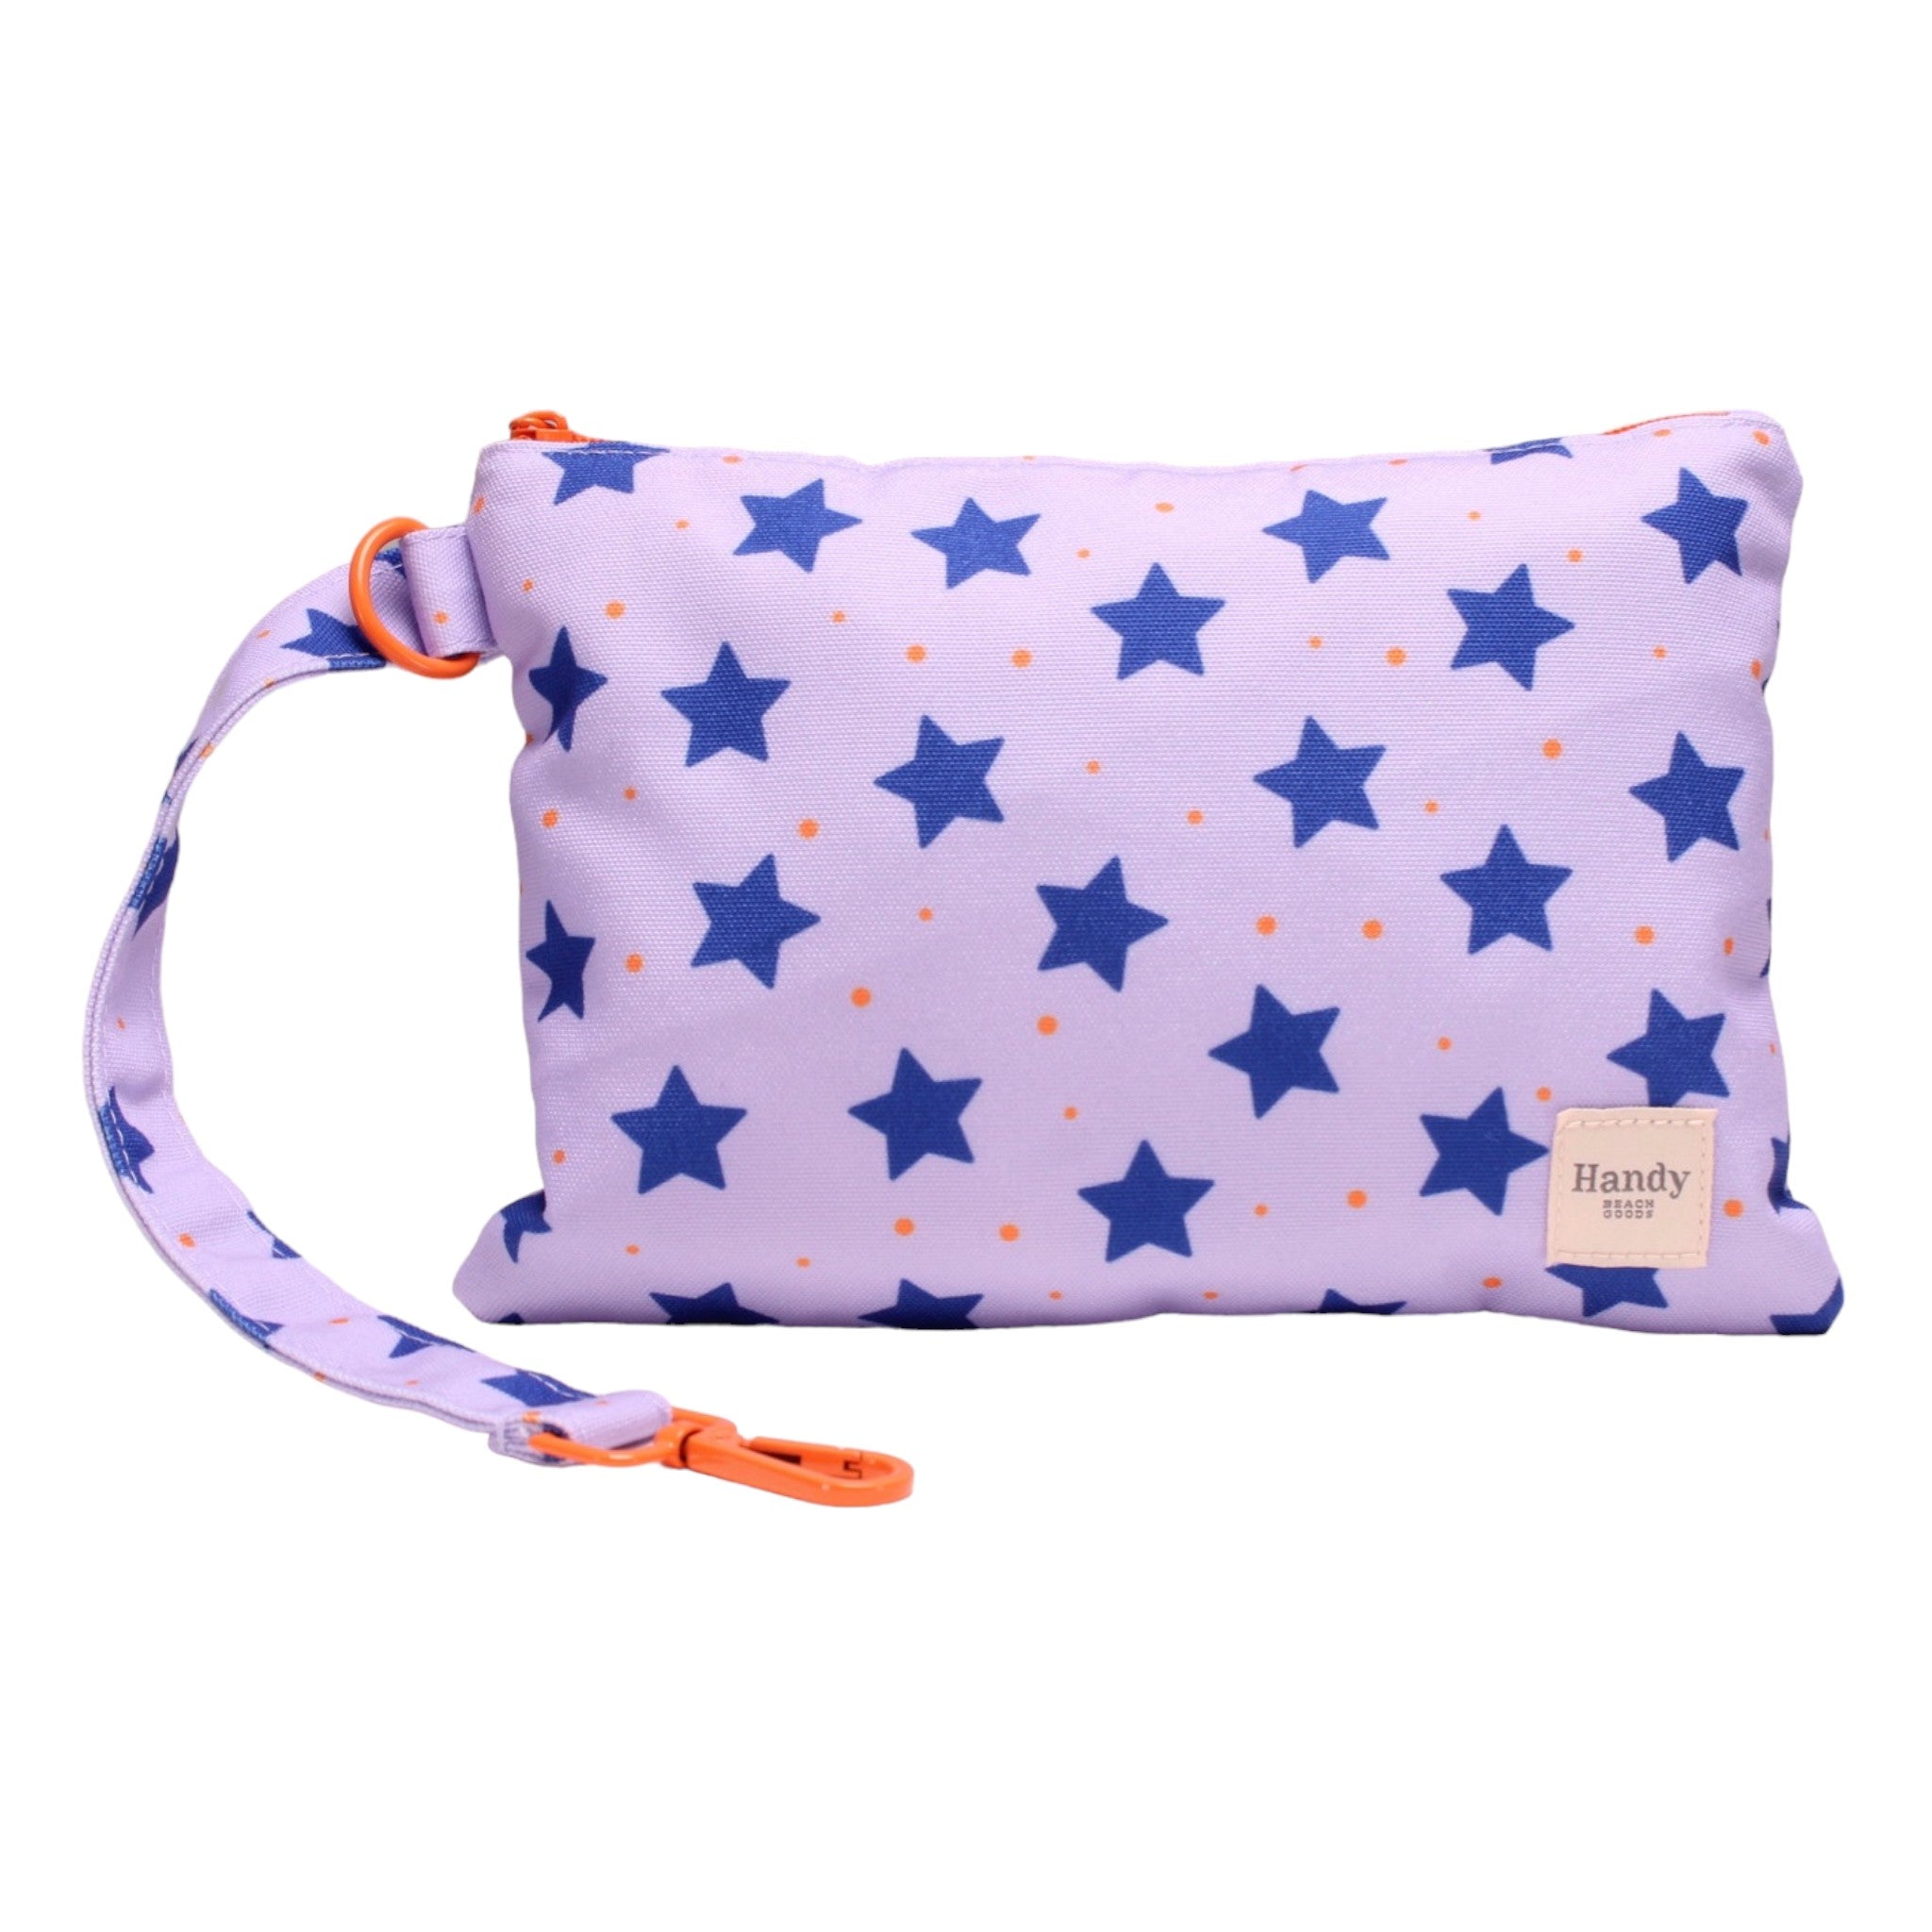 STARS - POUCH WITH WRISTLET BUCKLE